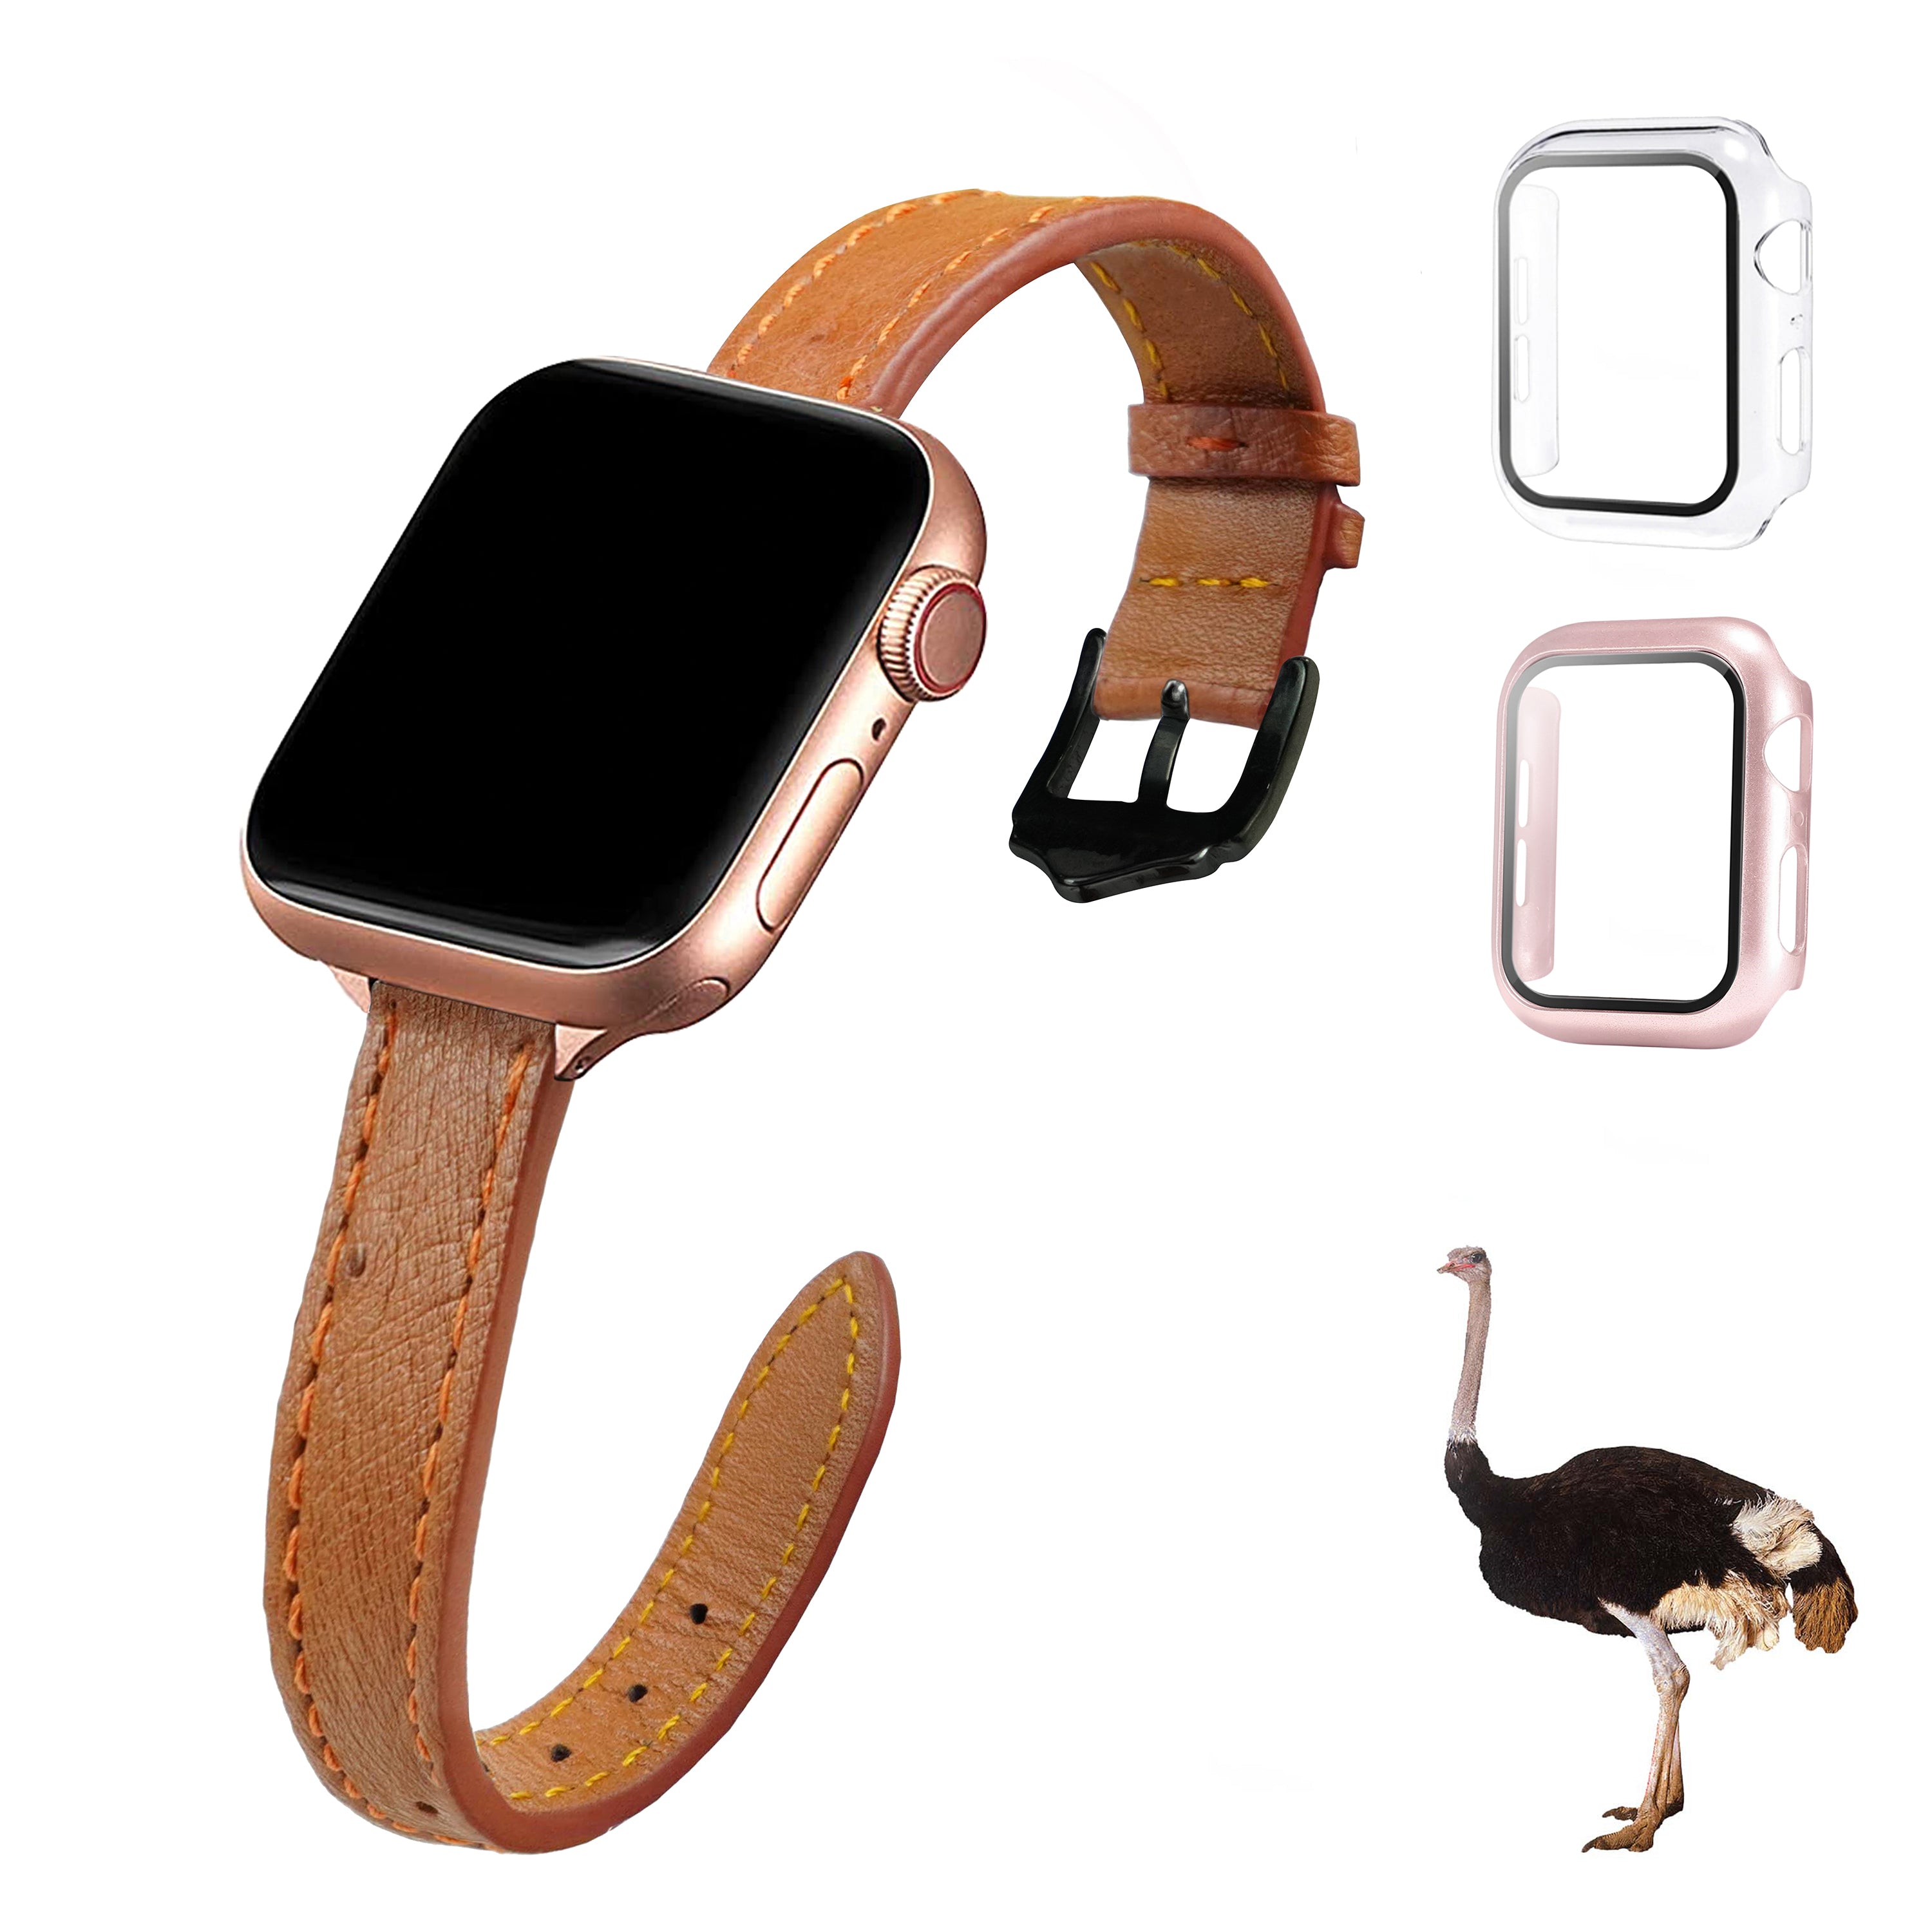 Light Brown Flat Ostrich Leather Band Compatible Apple Watch Iwatch 40mm Screen Protector Case Black Adapter Replacement Strap For Smartwatch Series 4 5 6 SE Leather Handmade AW-186B-W-40MM